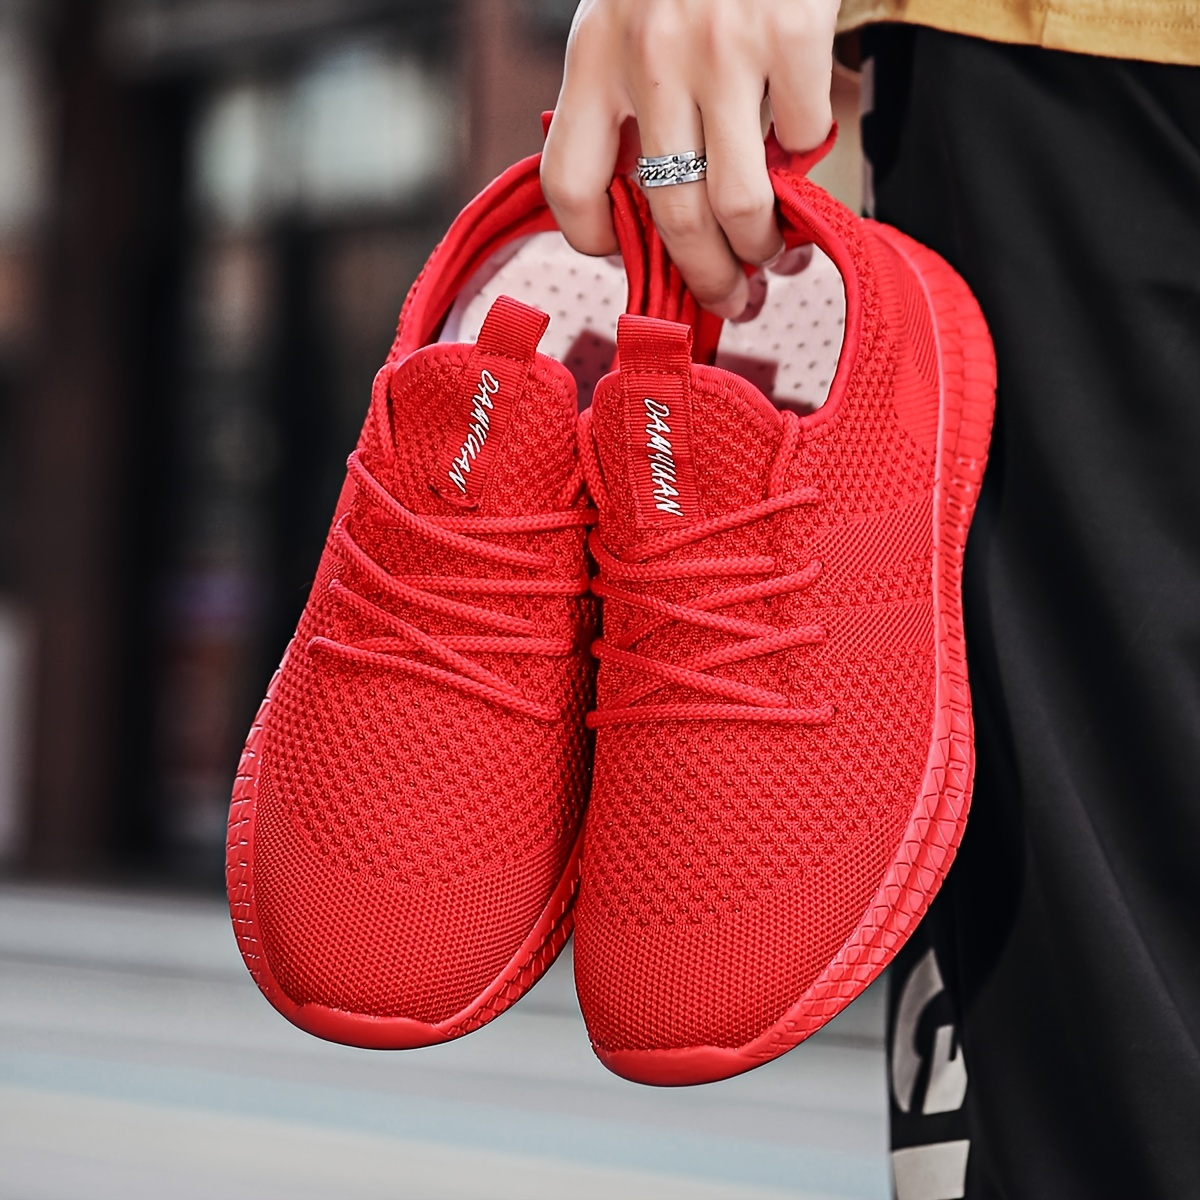 Red Womens Ballet Flats | Ballet Flat Shoes Red, for Women-totobed.com.vn